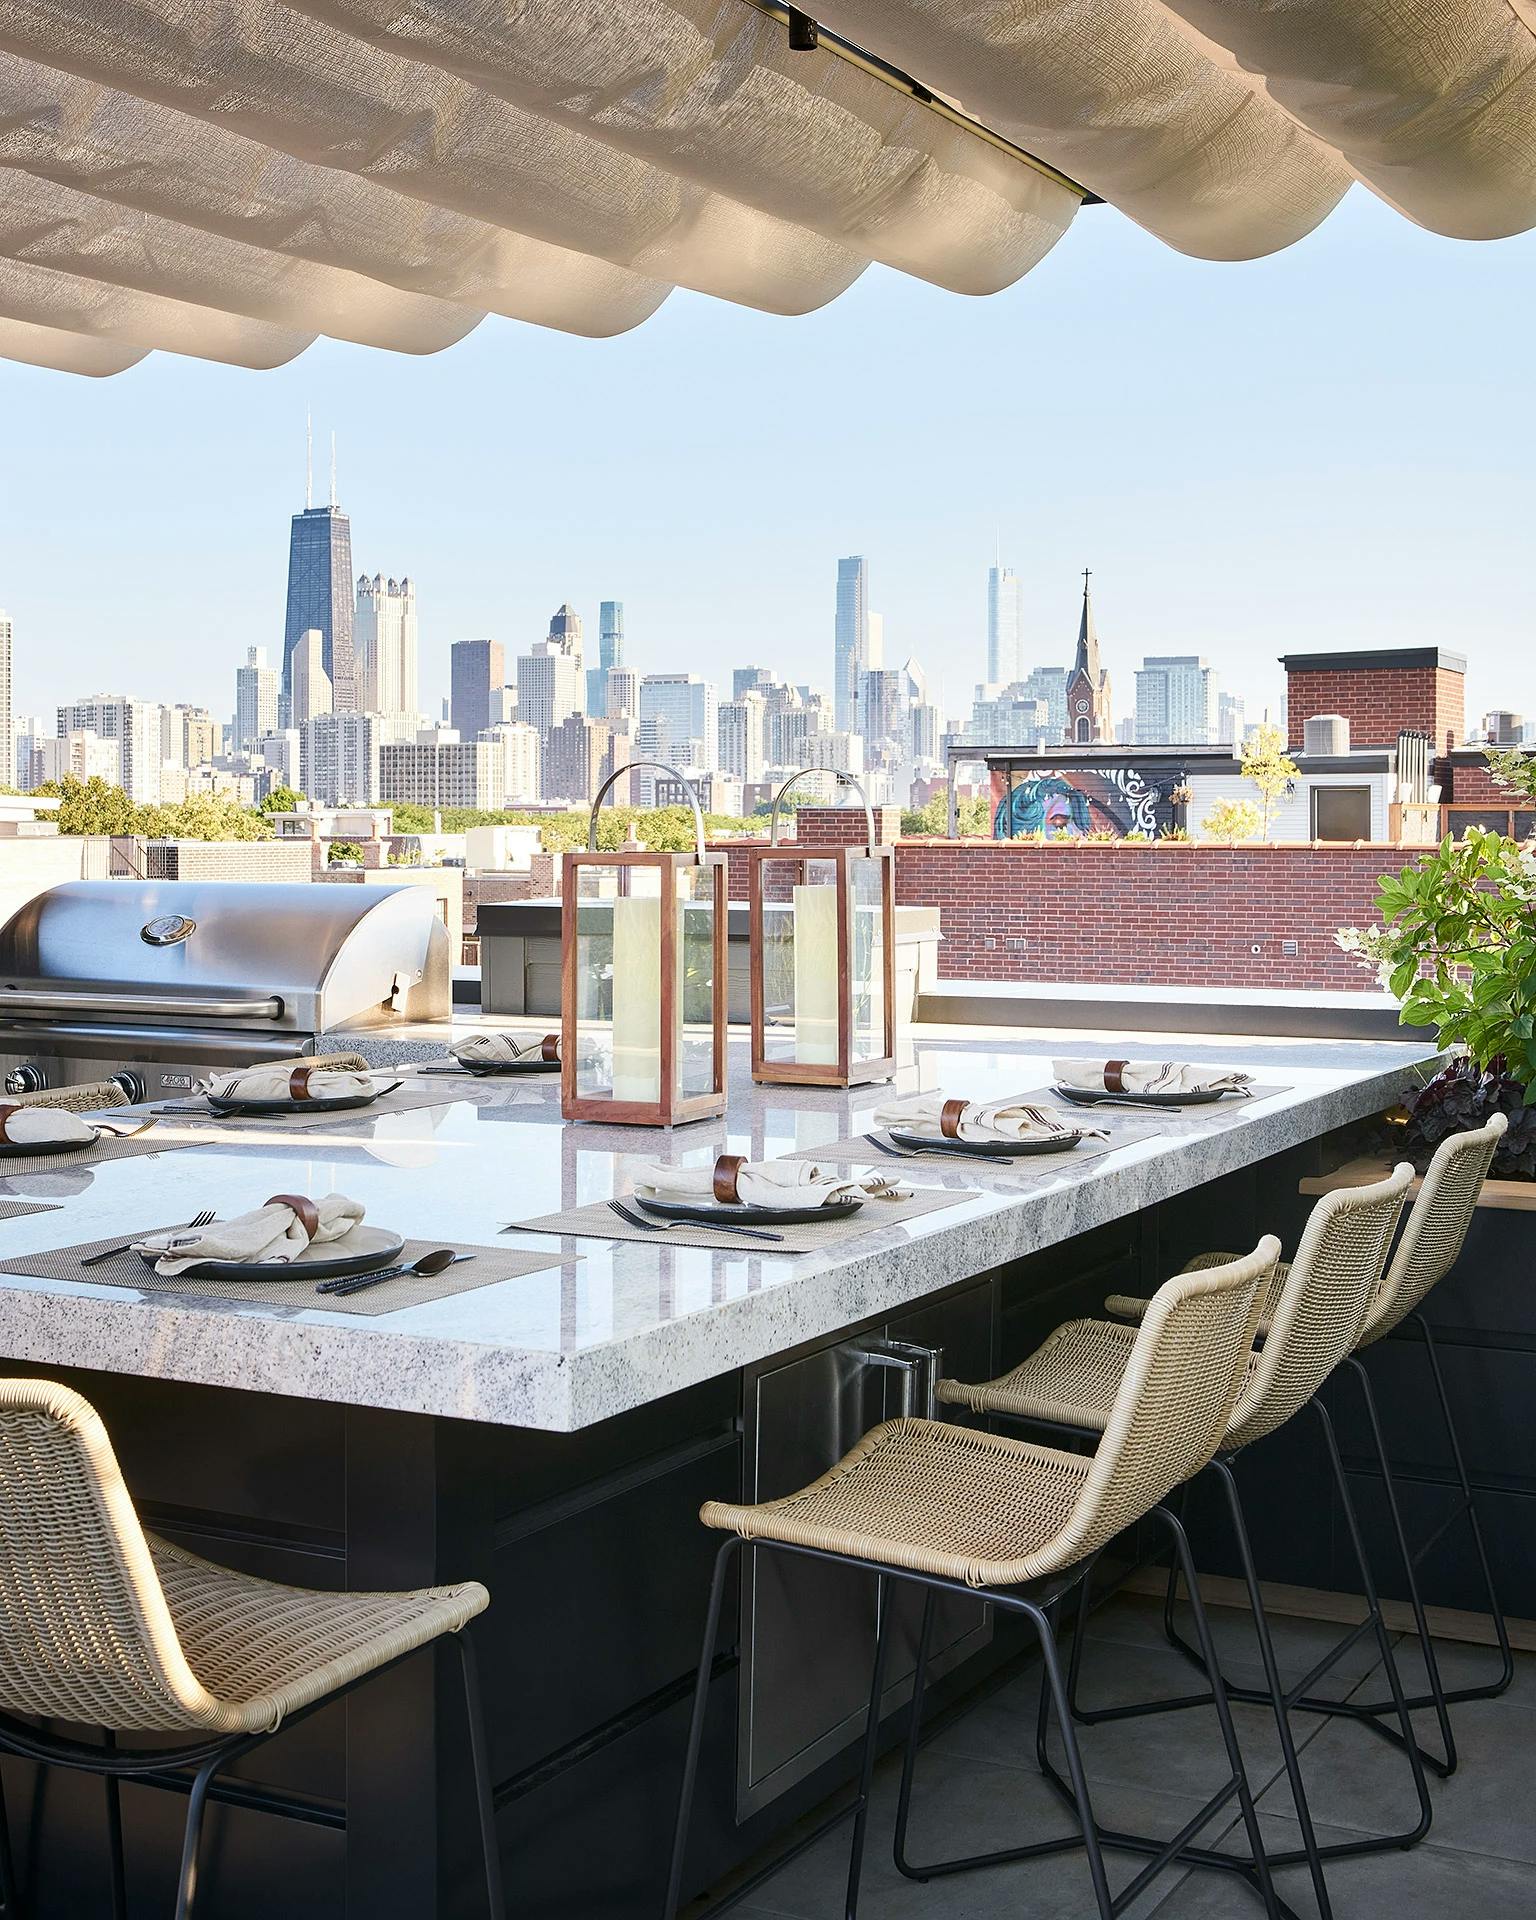 Roof deck with a large marble table and built in stainless steel grill overlooking the Chicago skyline in the distance.